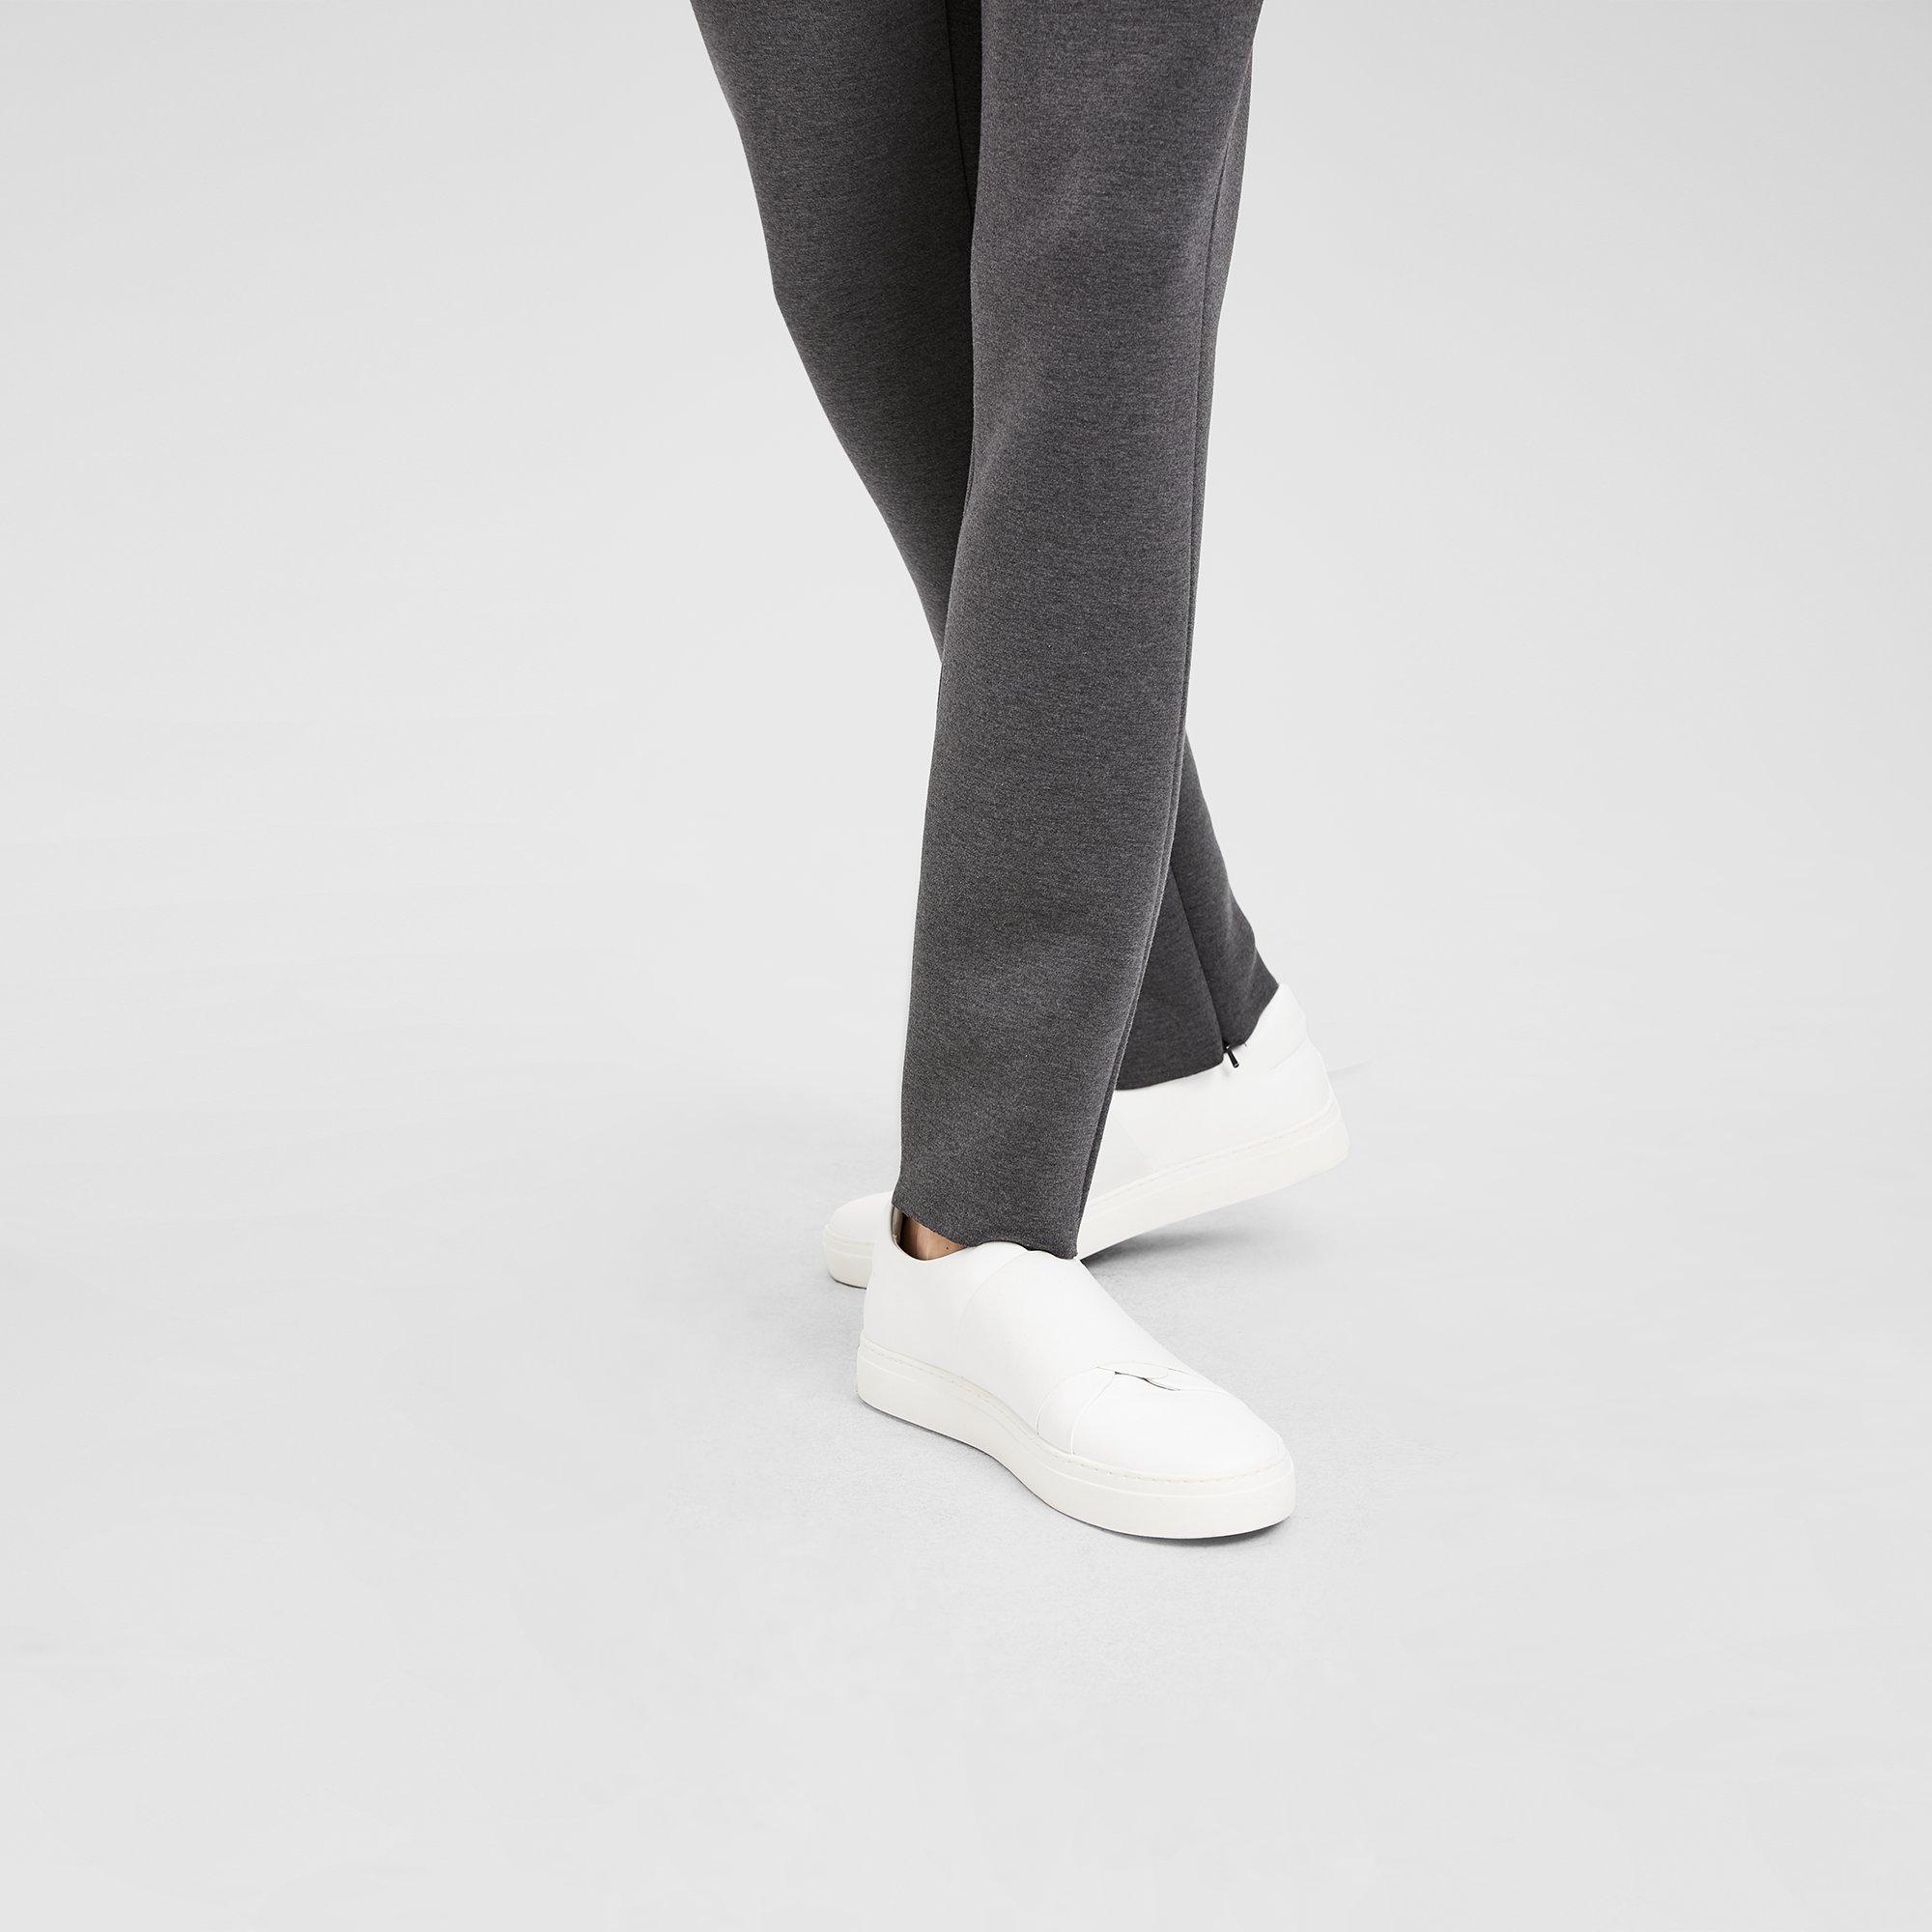 Theory Scuba Pant in Mink – Raggs - Fashion for Men and Women